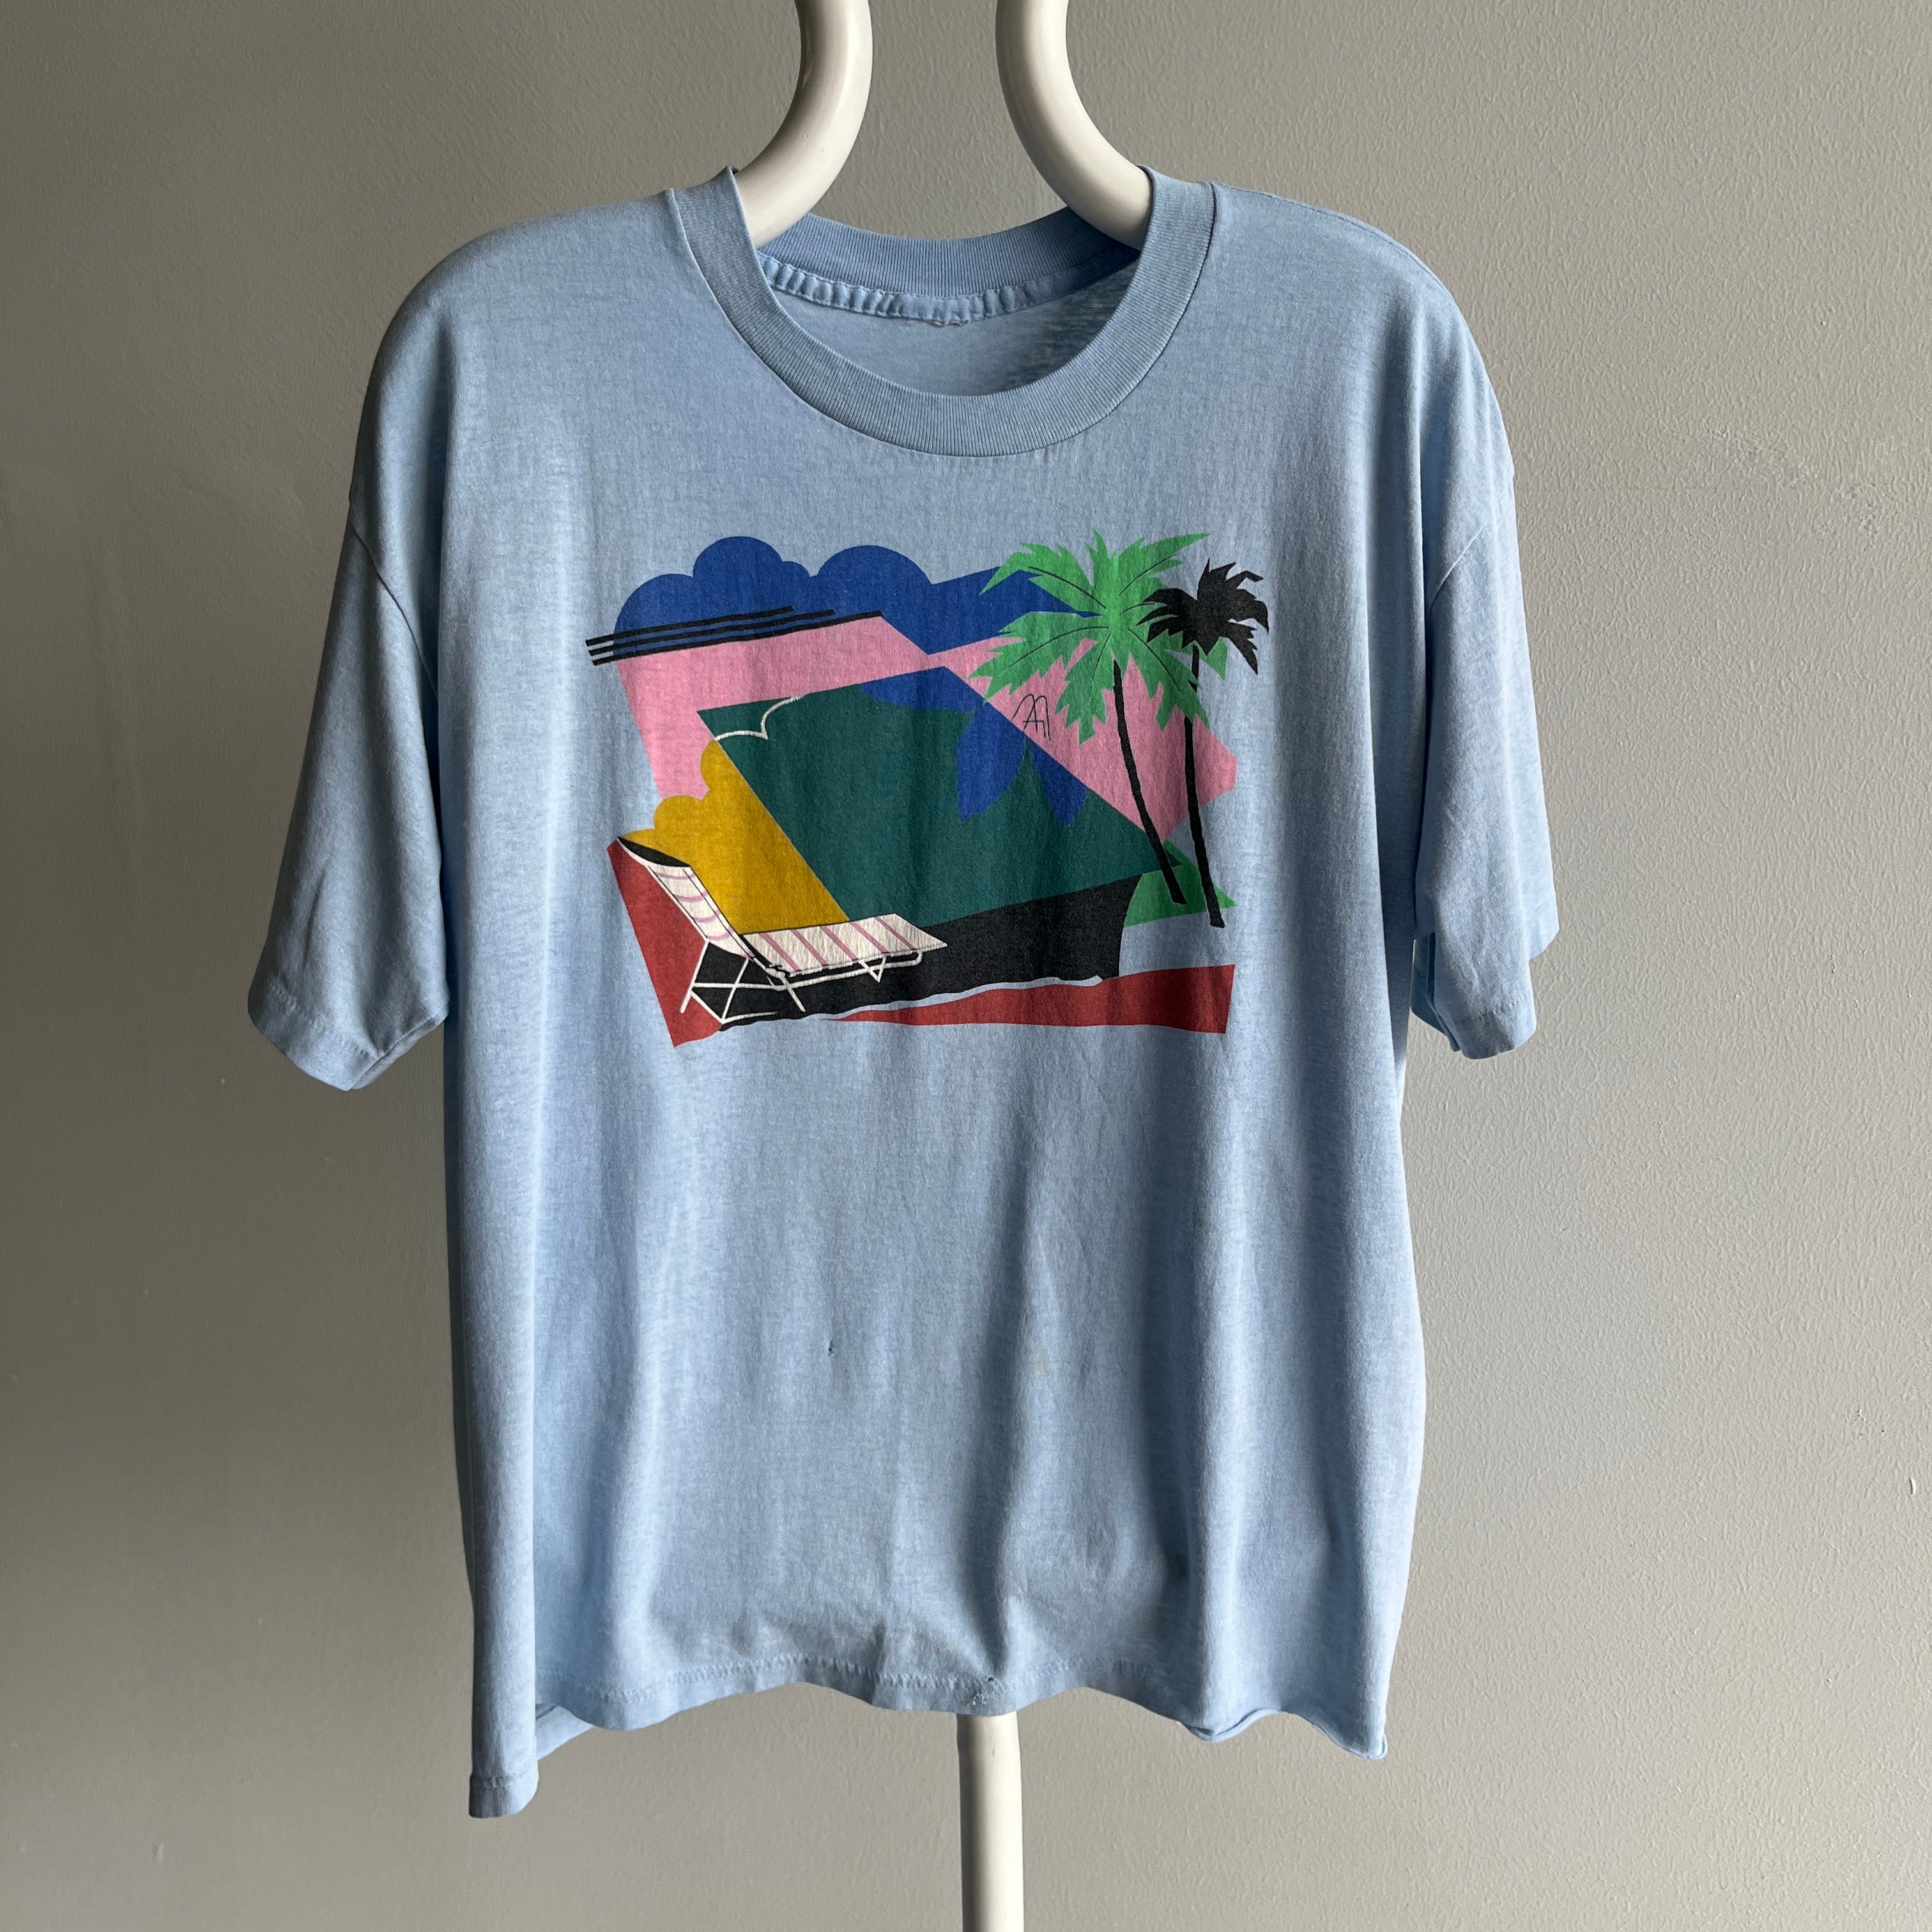 1980s Pool Scape Graphic T-Shirt - Very Cool